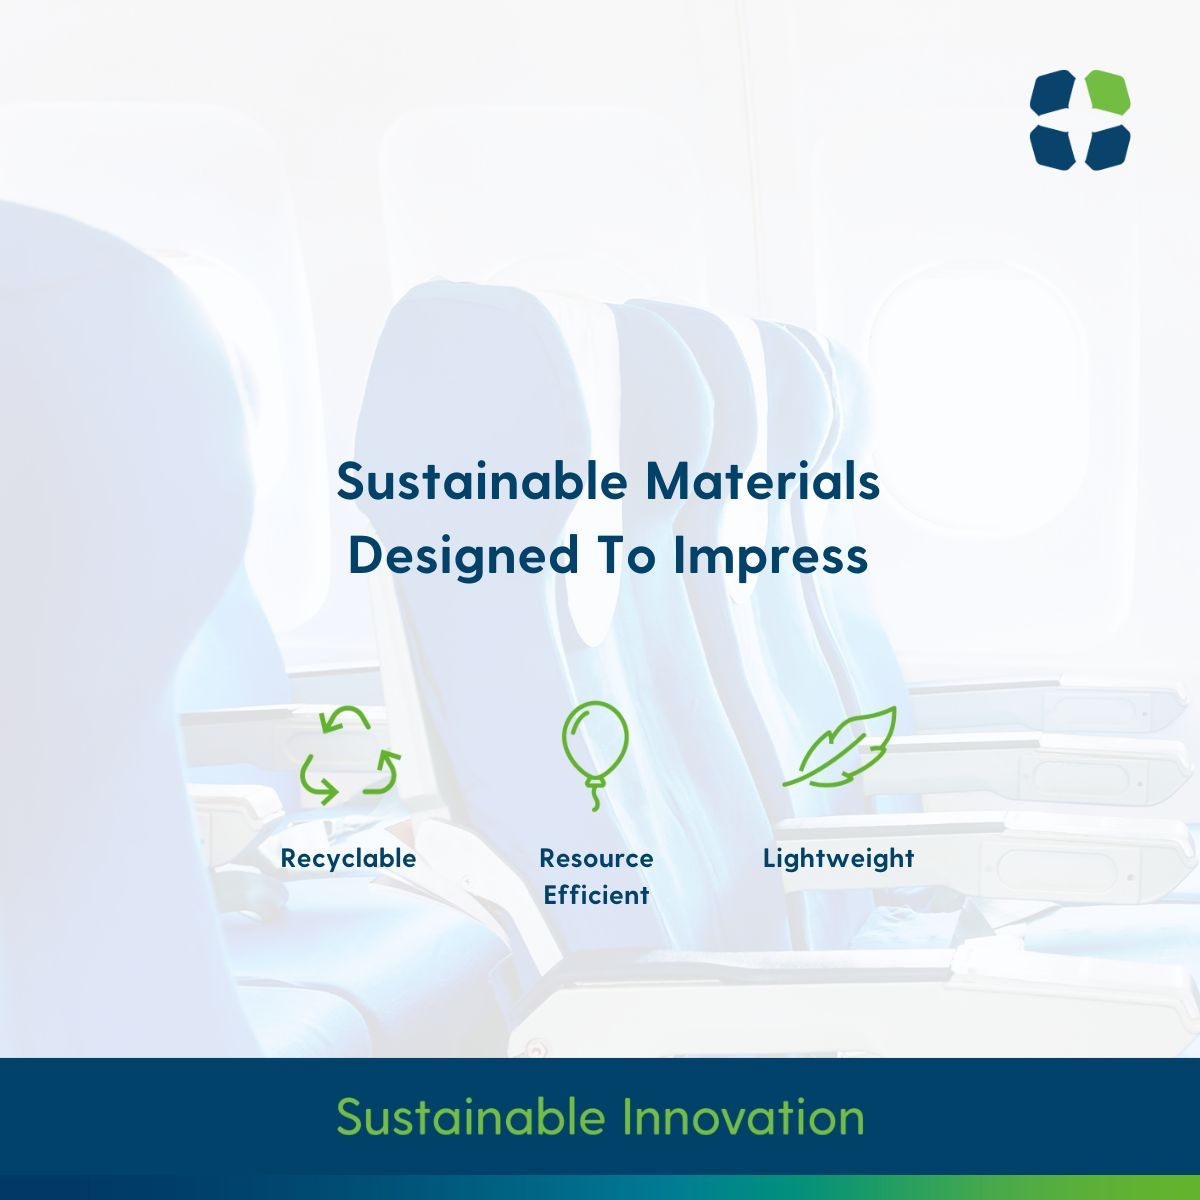 Weight and mass reduction is an extremely important factor for the evolving aerospace industry where the development of weight-saving cabin seating components made from lightweight EPP instantly translates to improved economy and fuel consumption. 

#SustainableInnovation